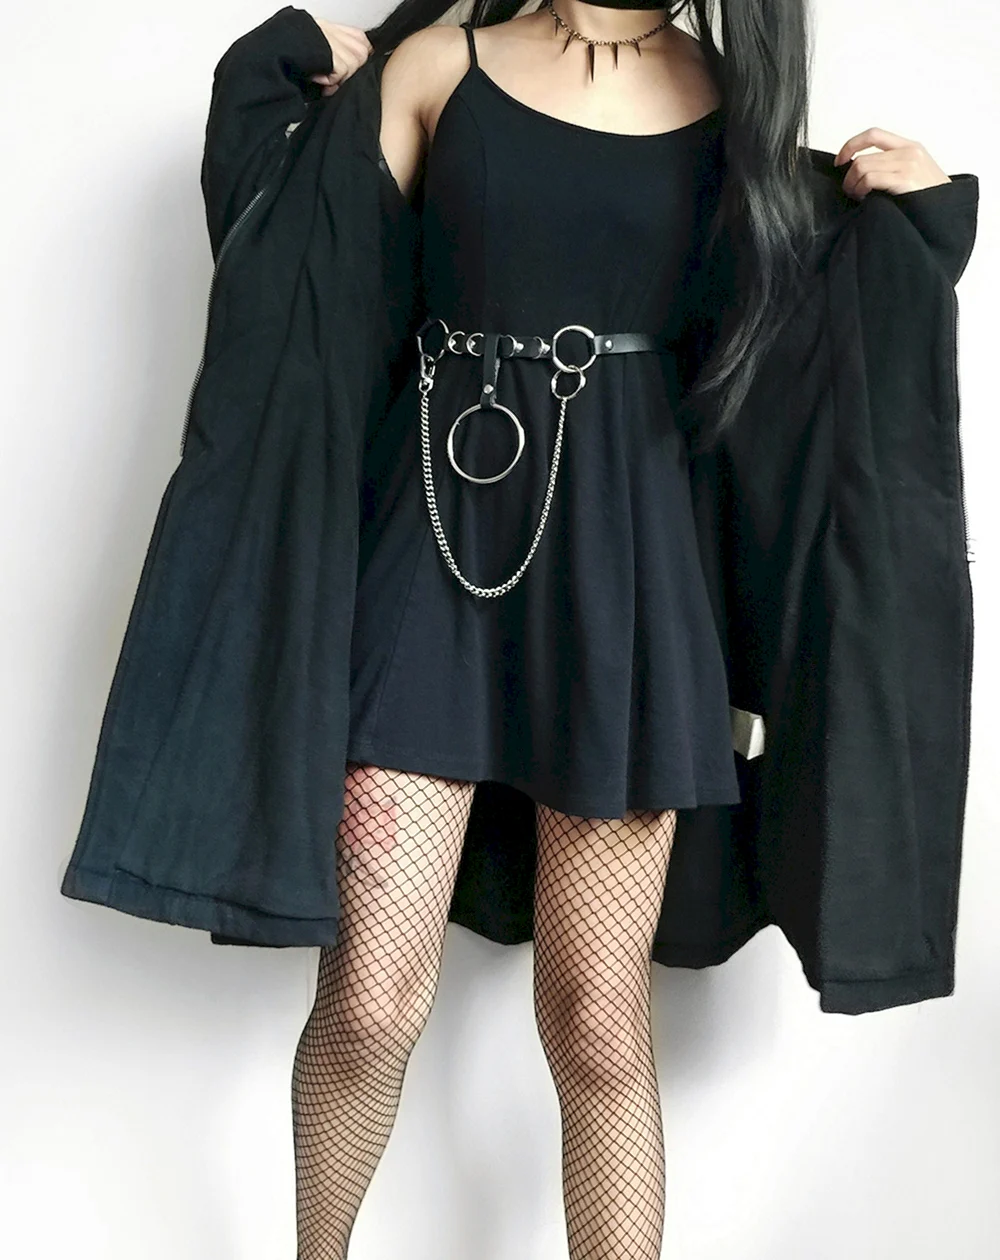 Goth outfit Грандж 2020 одежда